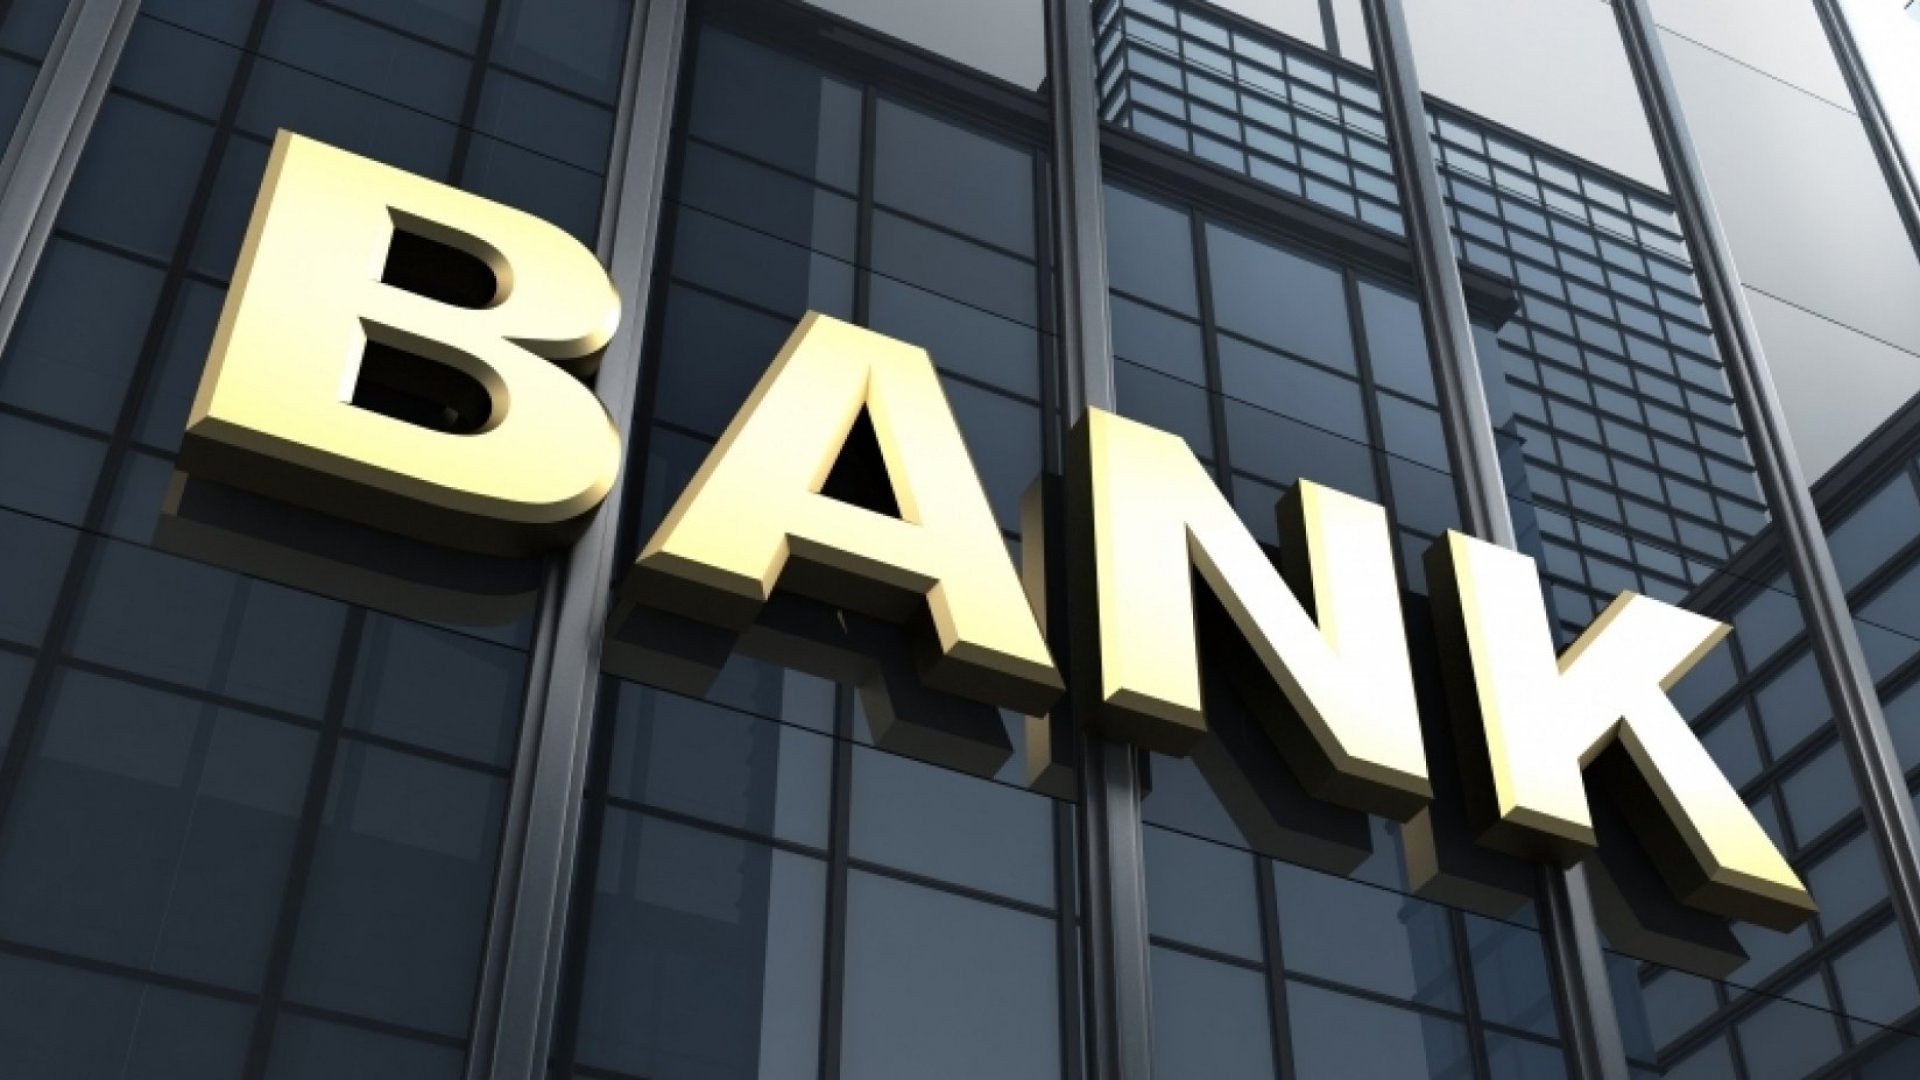 Listing of Top 10 Largest Bank in India